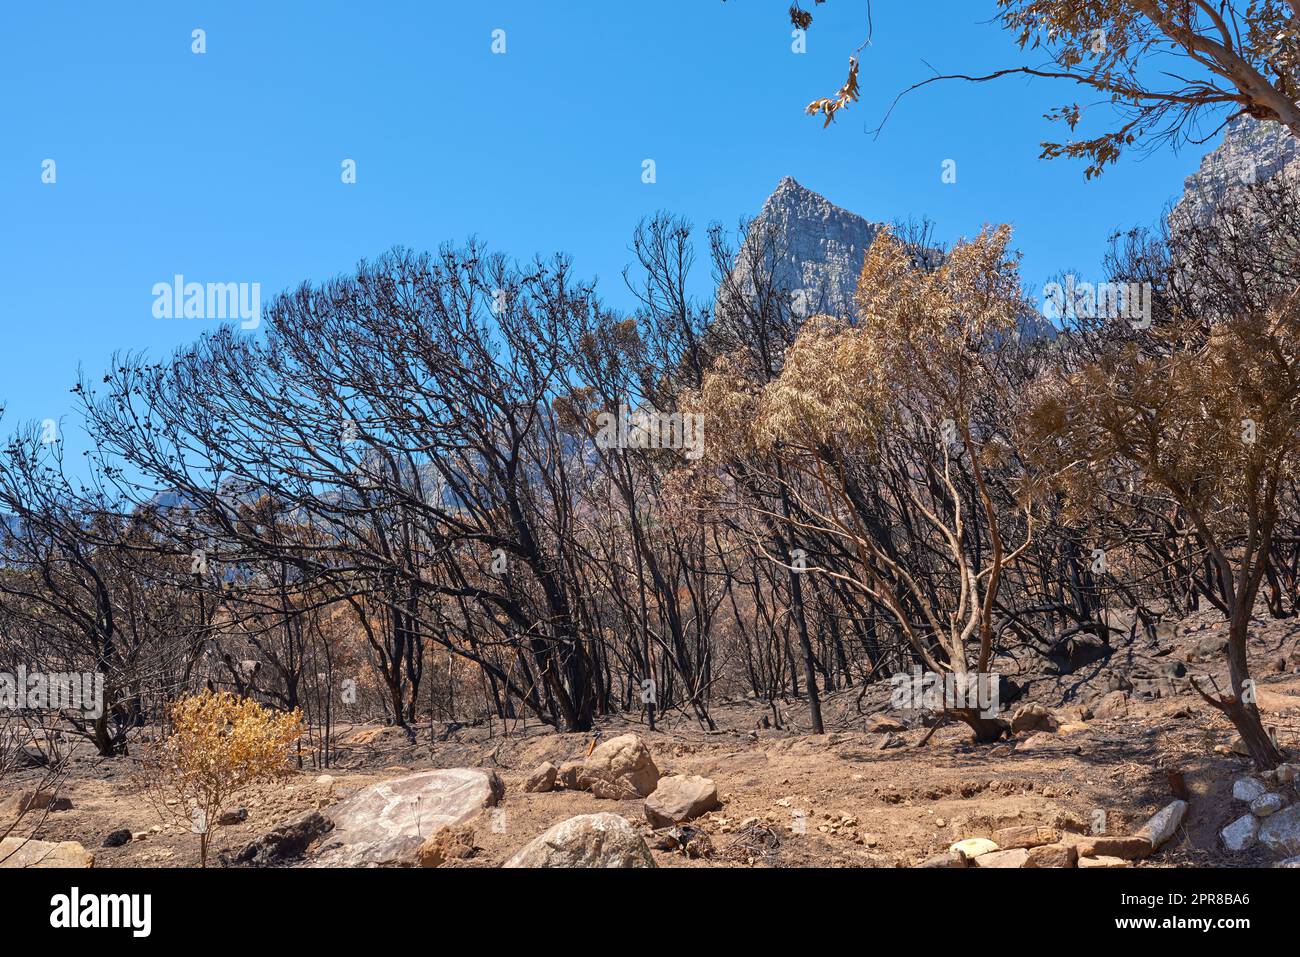 A forest of burnt trees after a bushfire on Table Mountain, Cape Town, South Africa. Lots of tall trees were destroyed in a wildfire. Below of black scorched tree trunks on a hilltop on a sunny day Stock Photo